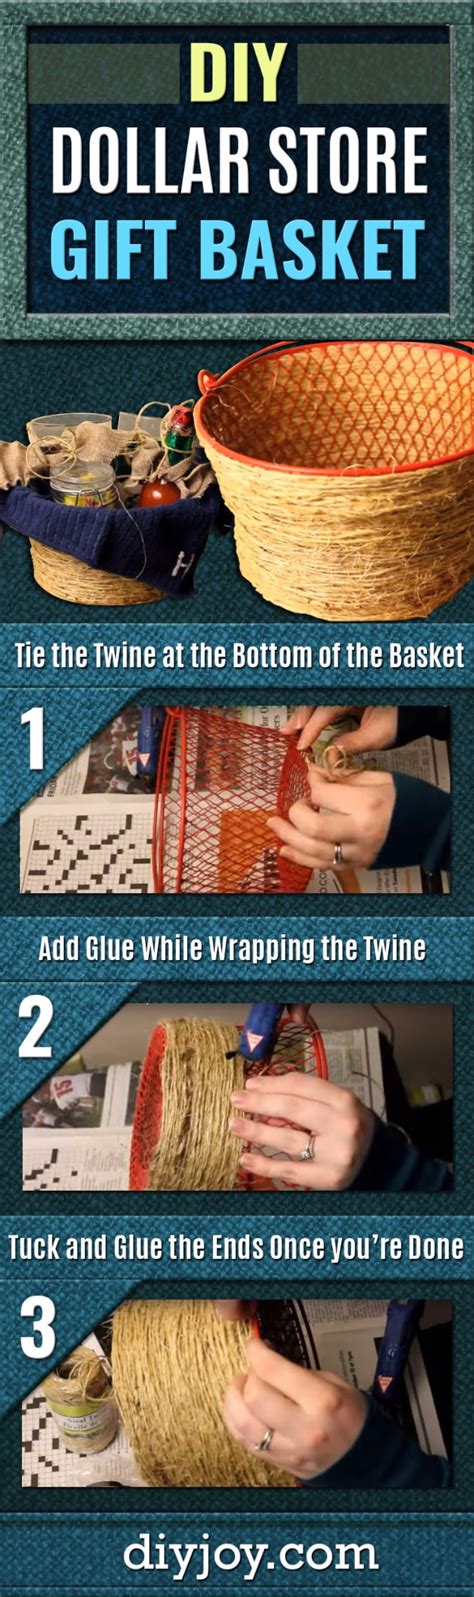 31 Cool Crafts Made With Baskets